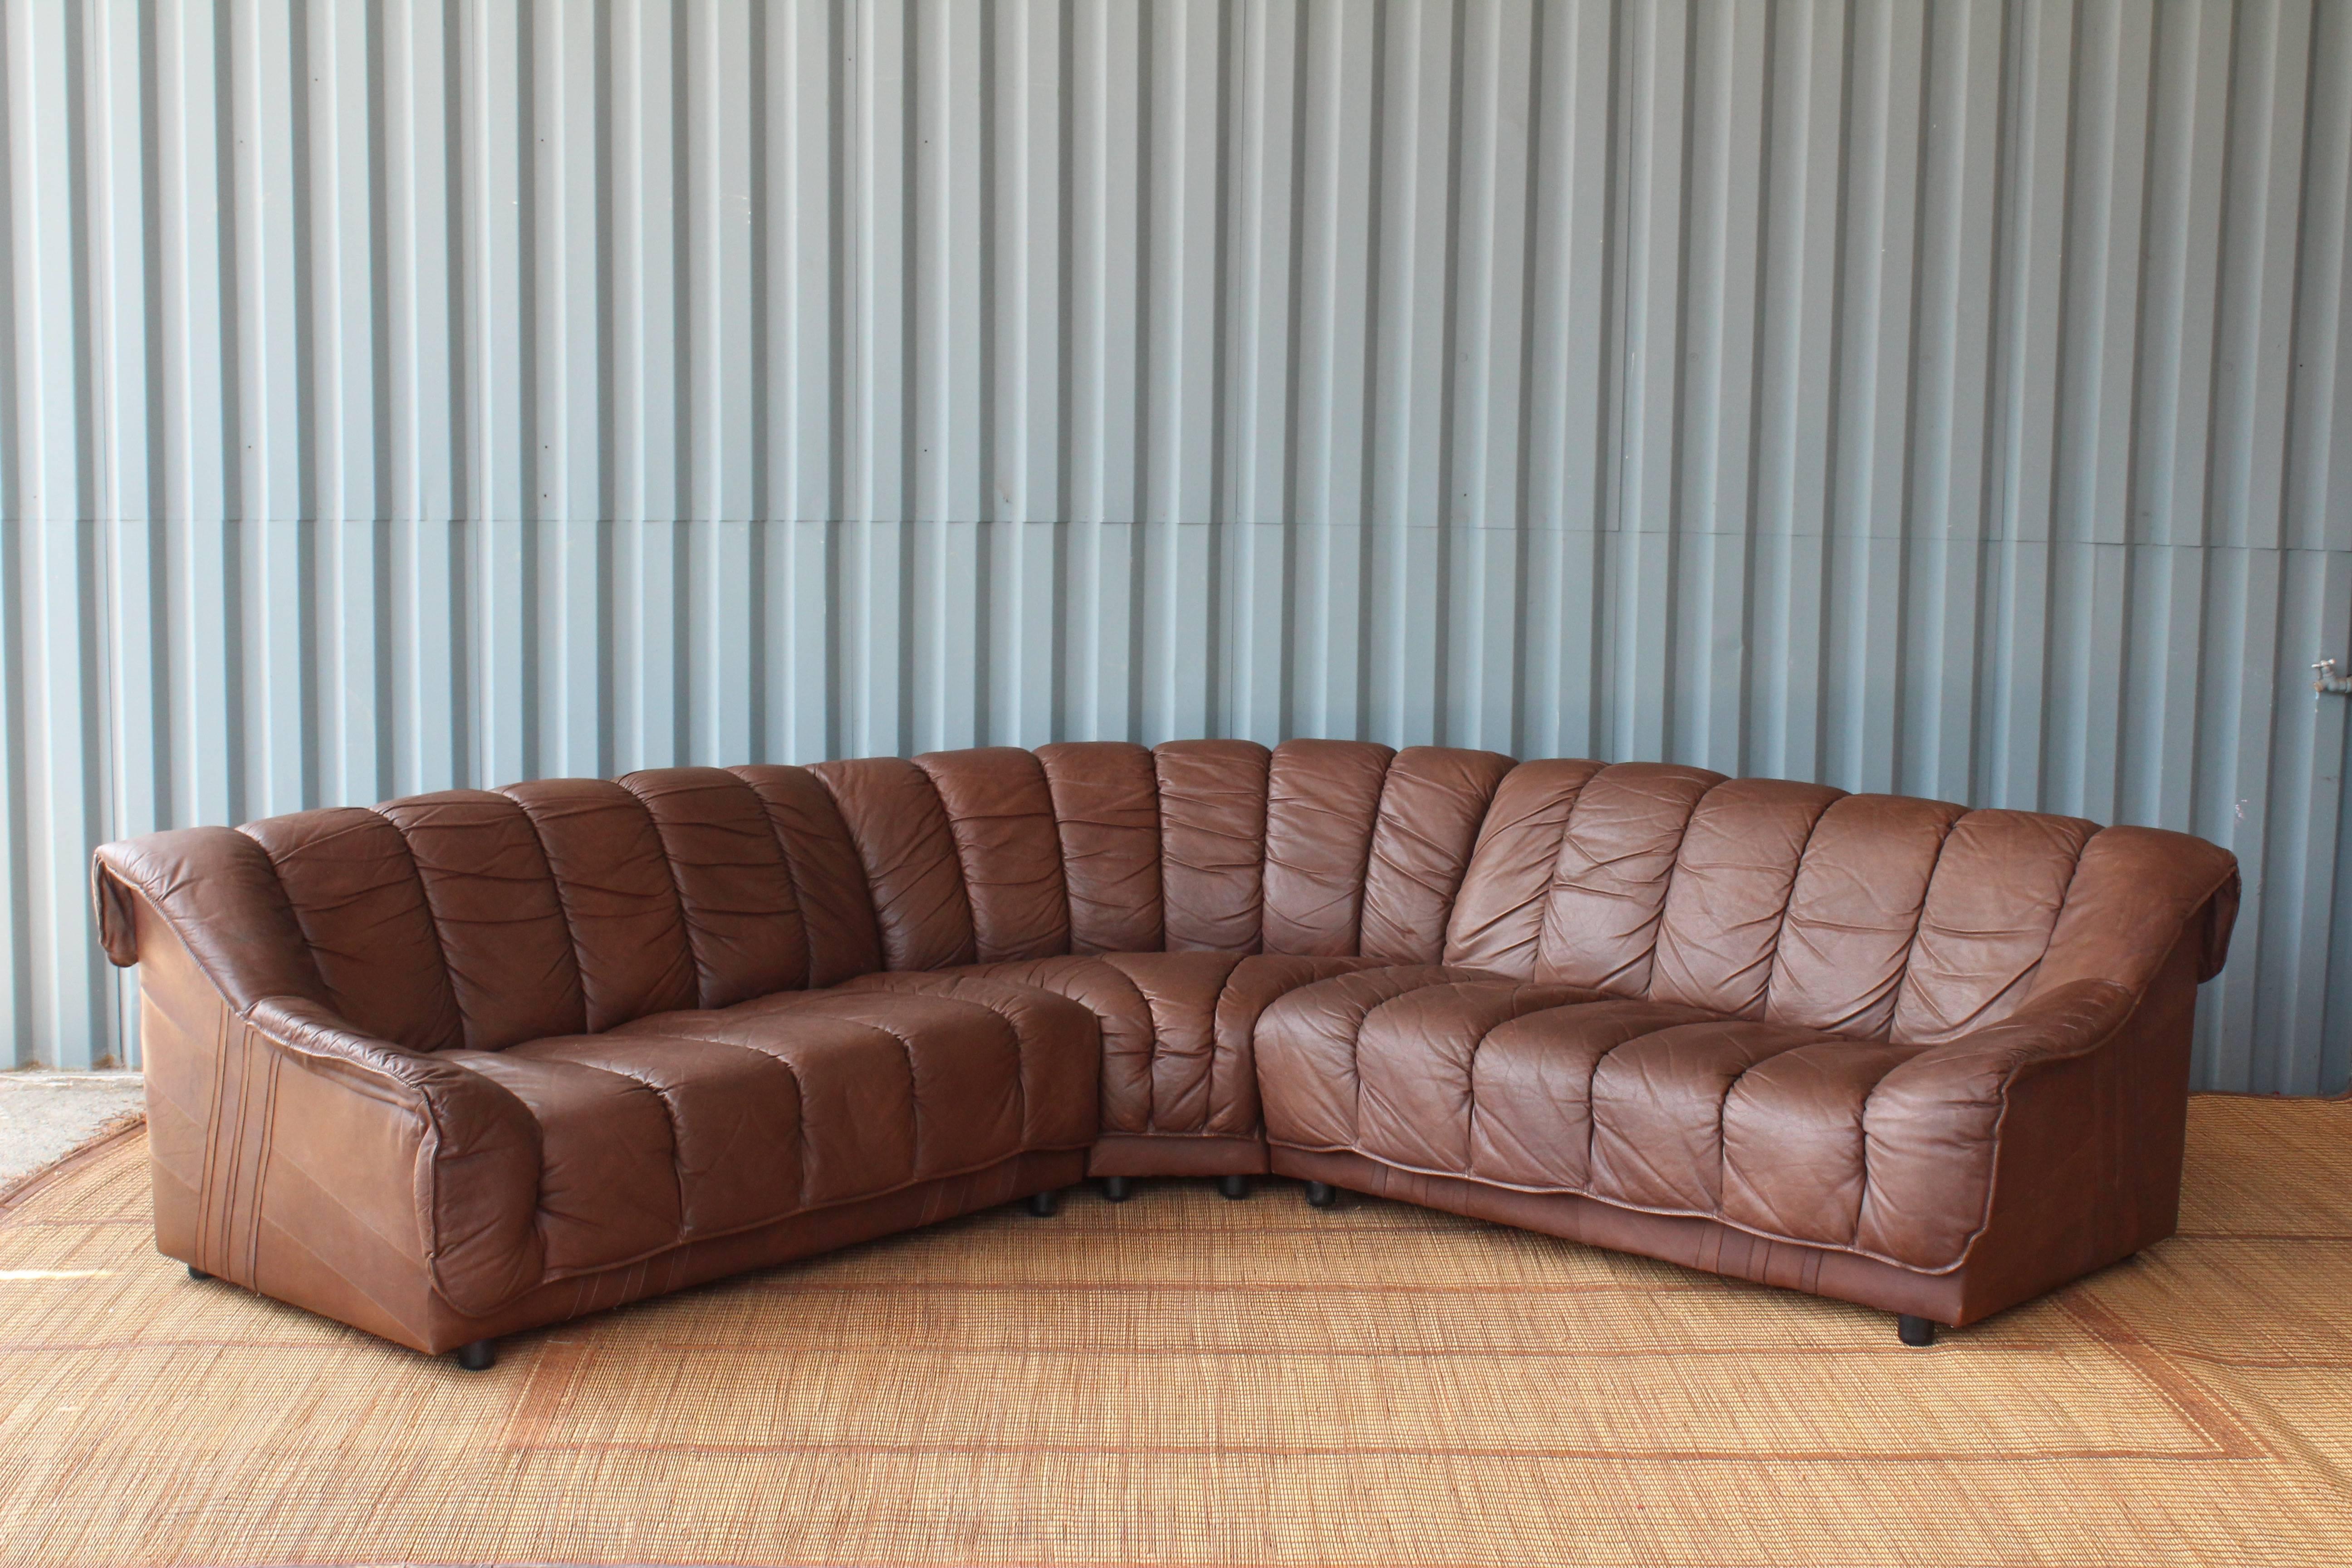 Impressive, 1970s sectional sofa and matching chair in leather. Exceptional condition and extremely comfortable. This sofa connects in three separate pieces with hardware for easy attachment. The leather has been recently cleaned and conditioned.